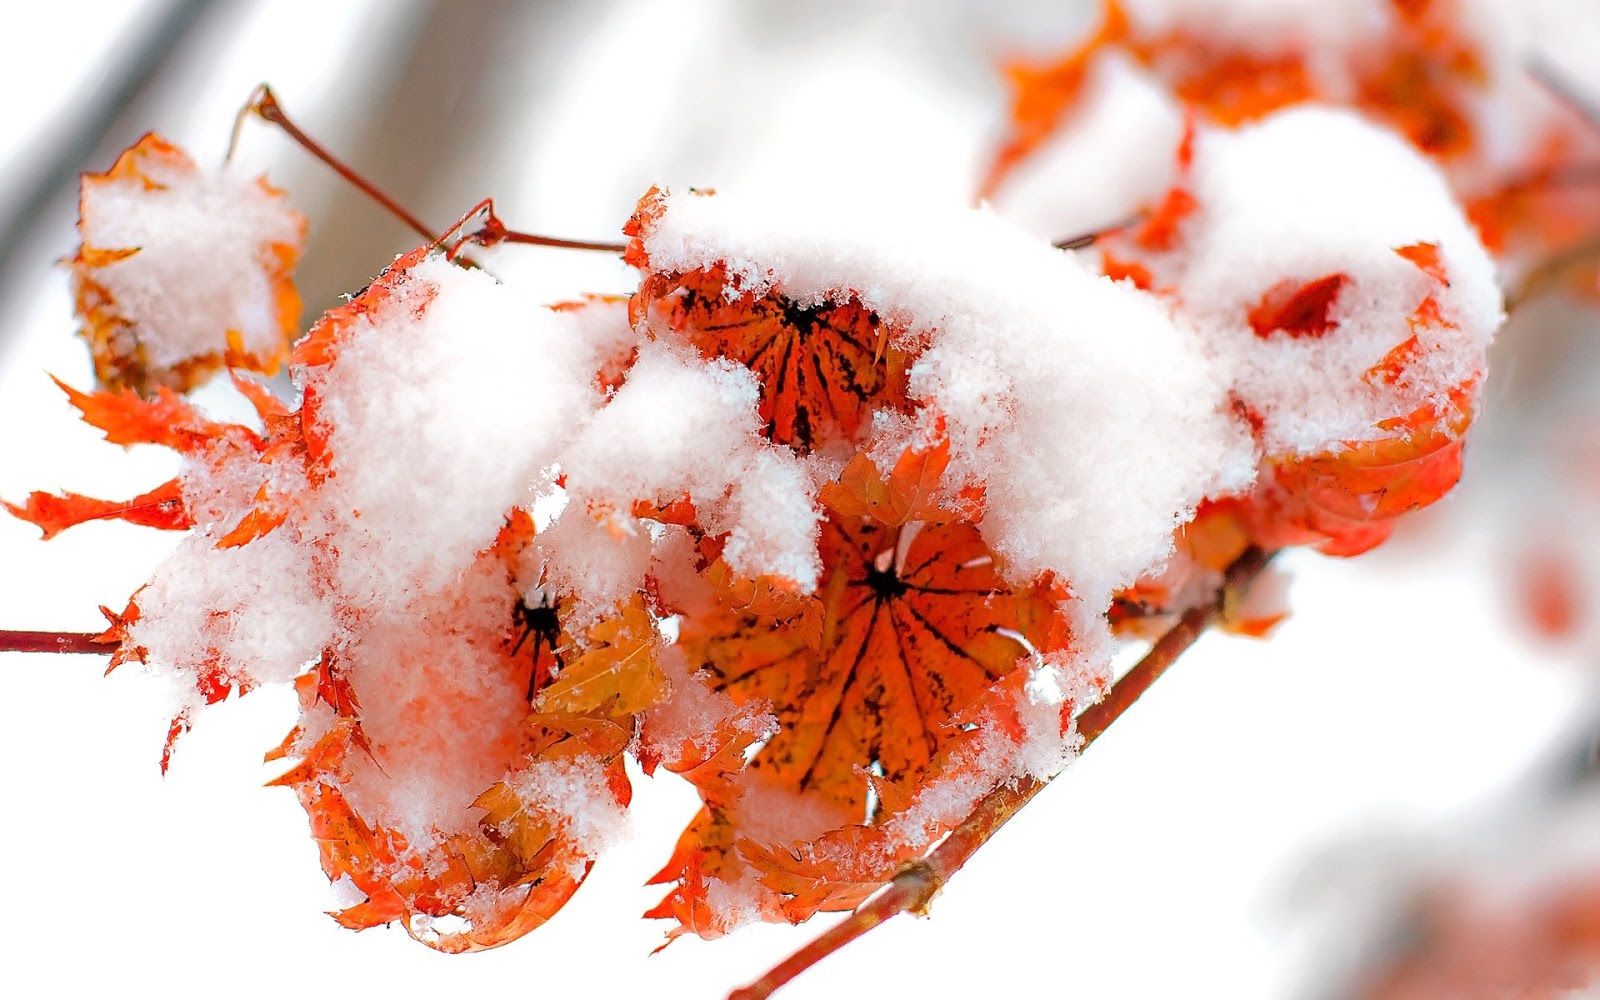 Nature Winter Snow Leaf Autumn Red Orange Photography Leaves Cold Fall